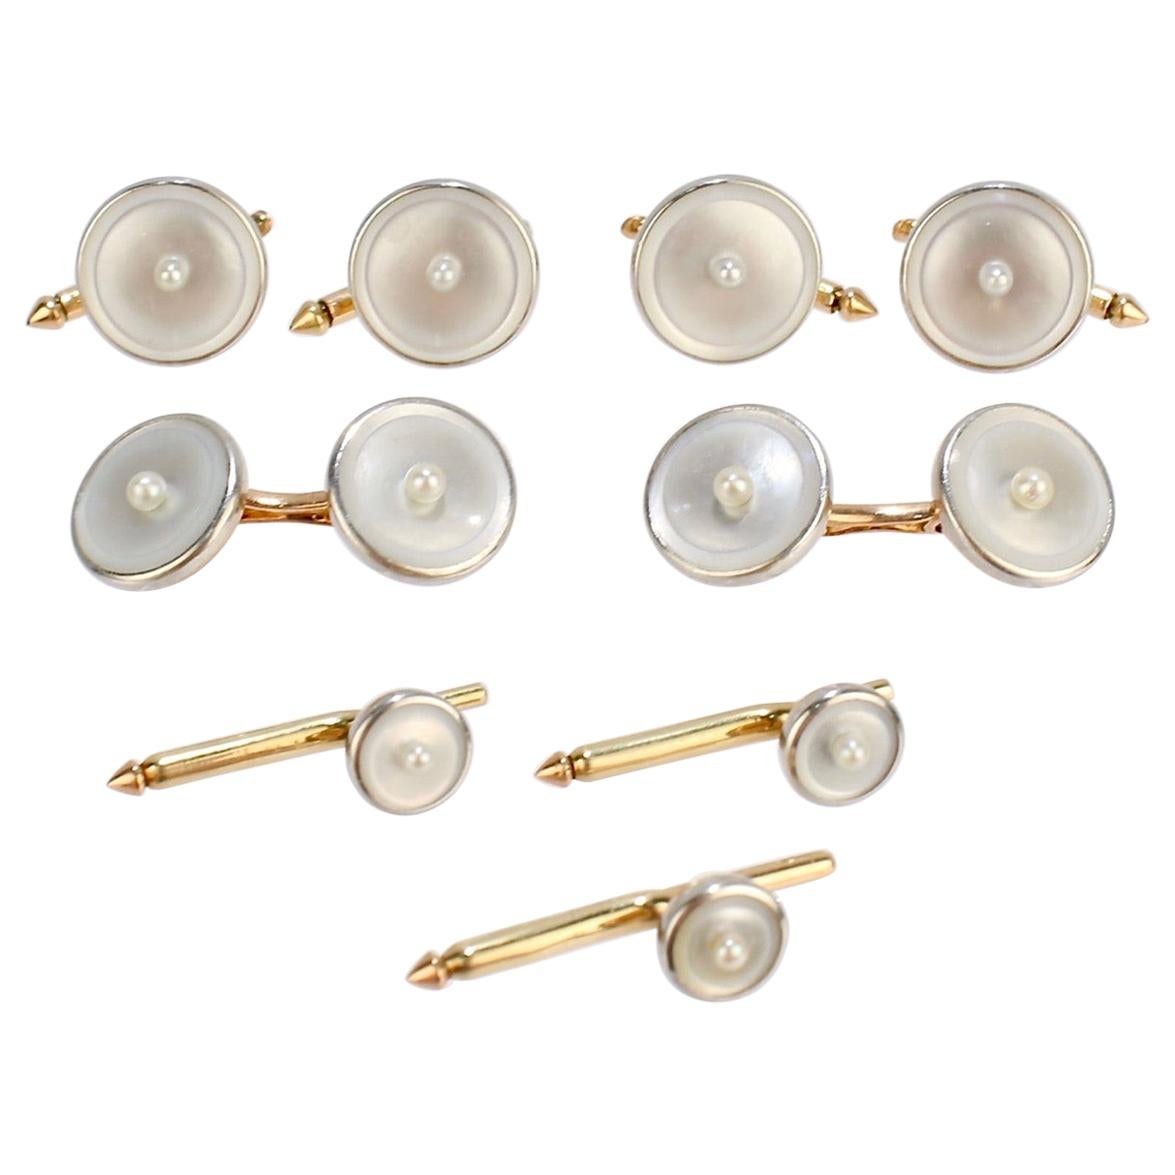 Art Deco 14 Karat Gold, Mother of Pearl and Seed Pearl Cufflink and Dress Set